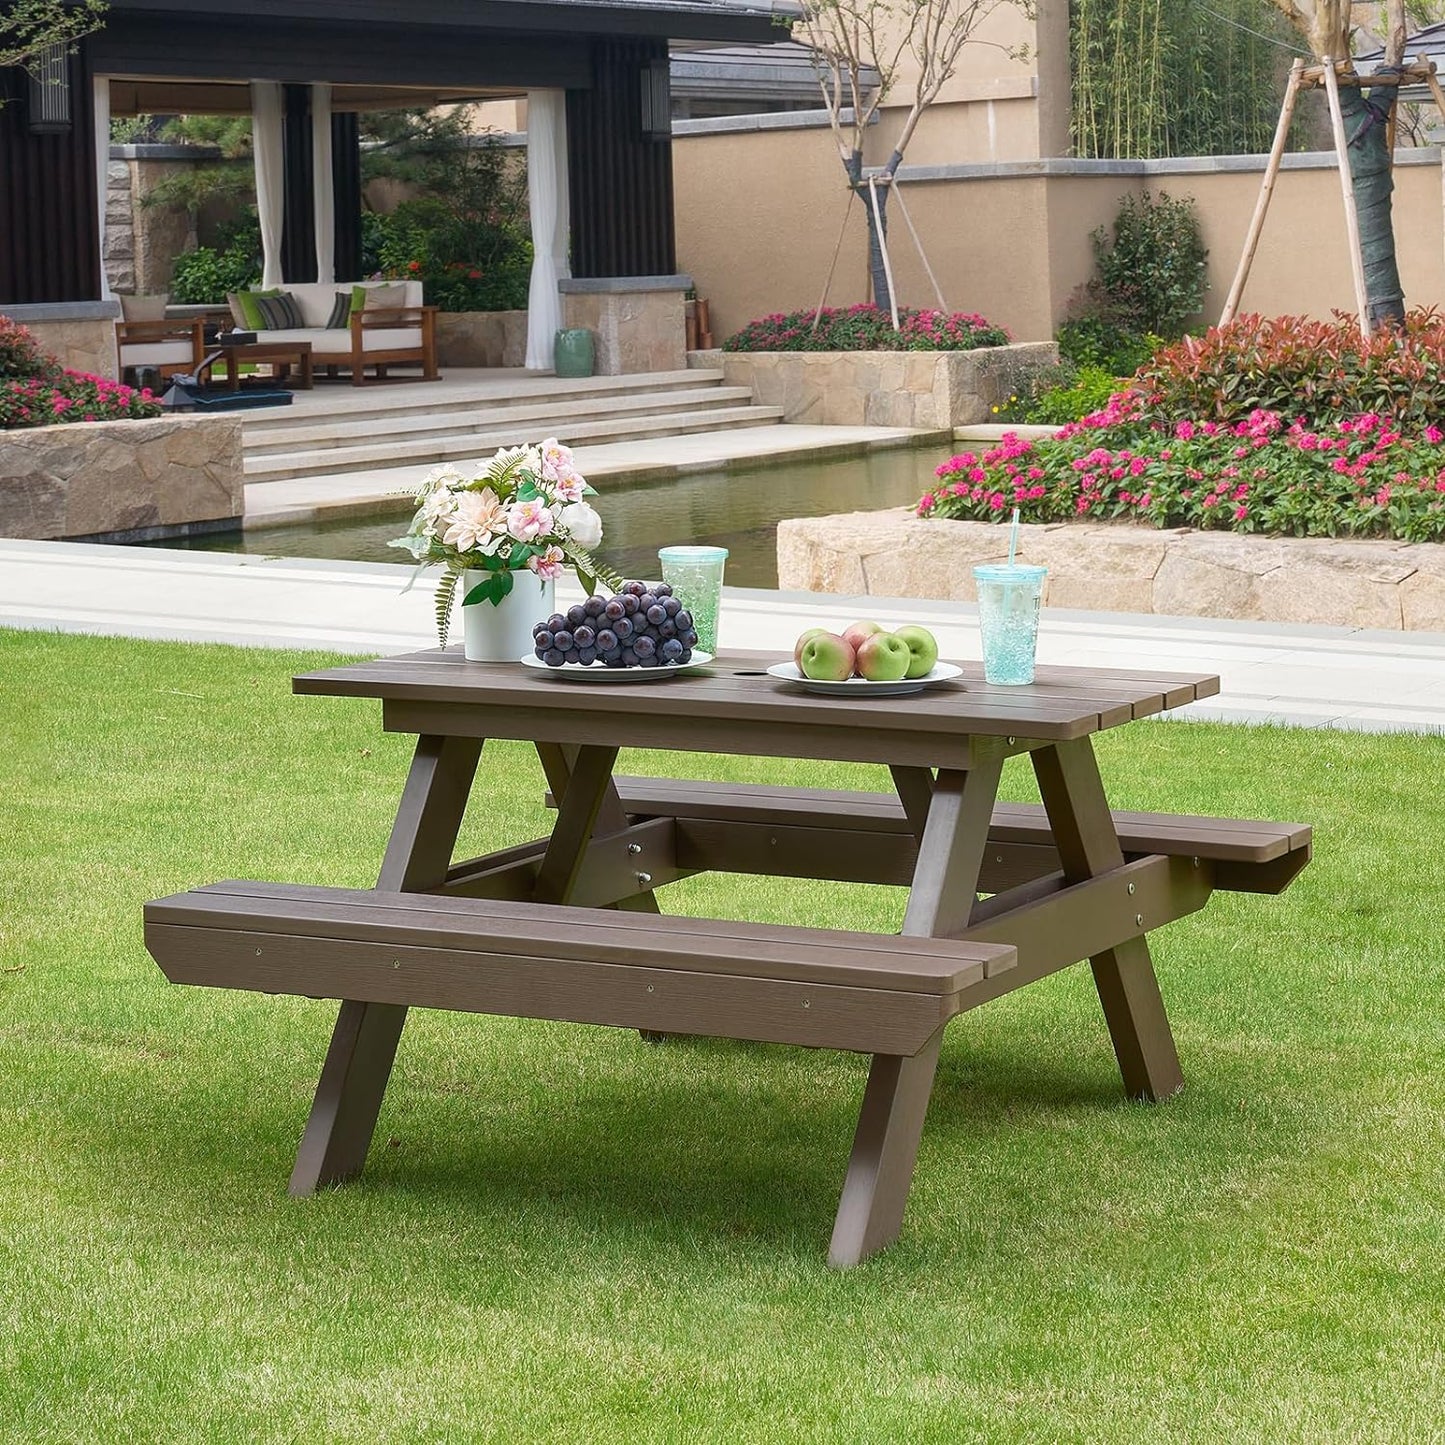 Psilvam All-in-One Outdoor Table and Chairs Teak Color